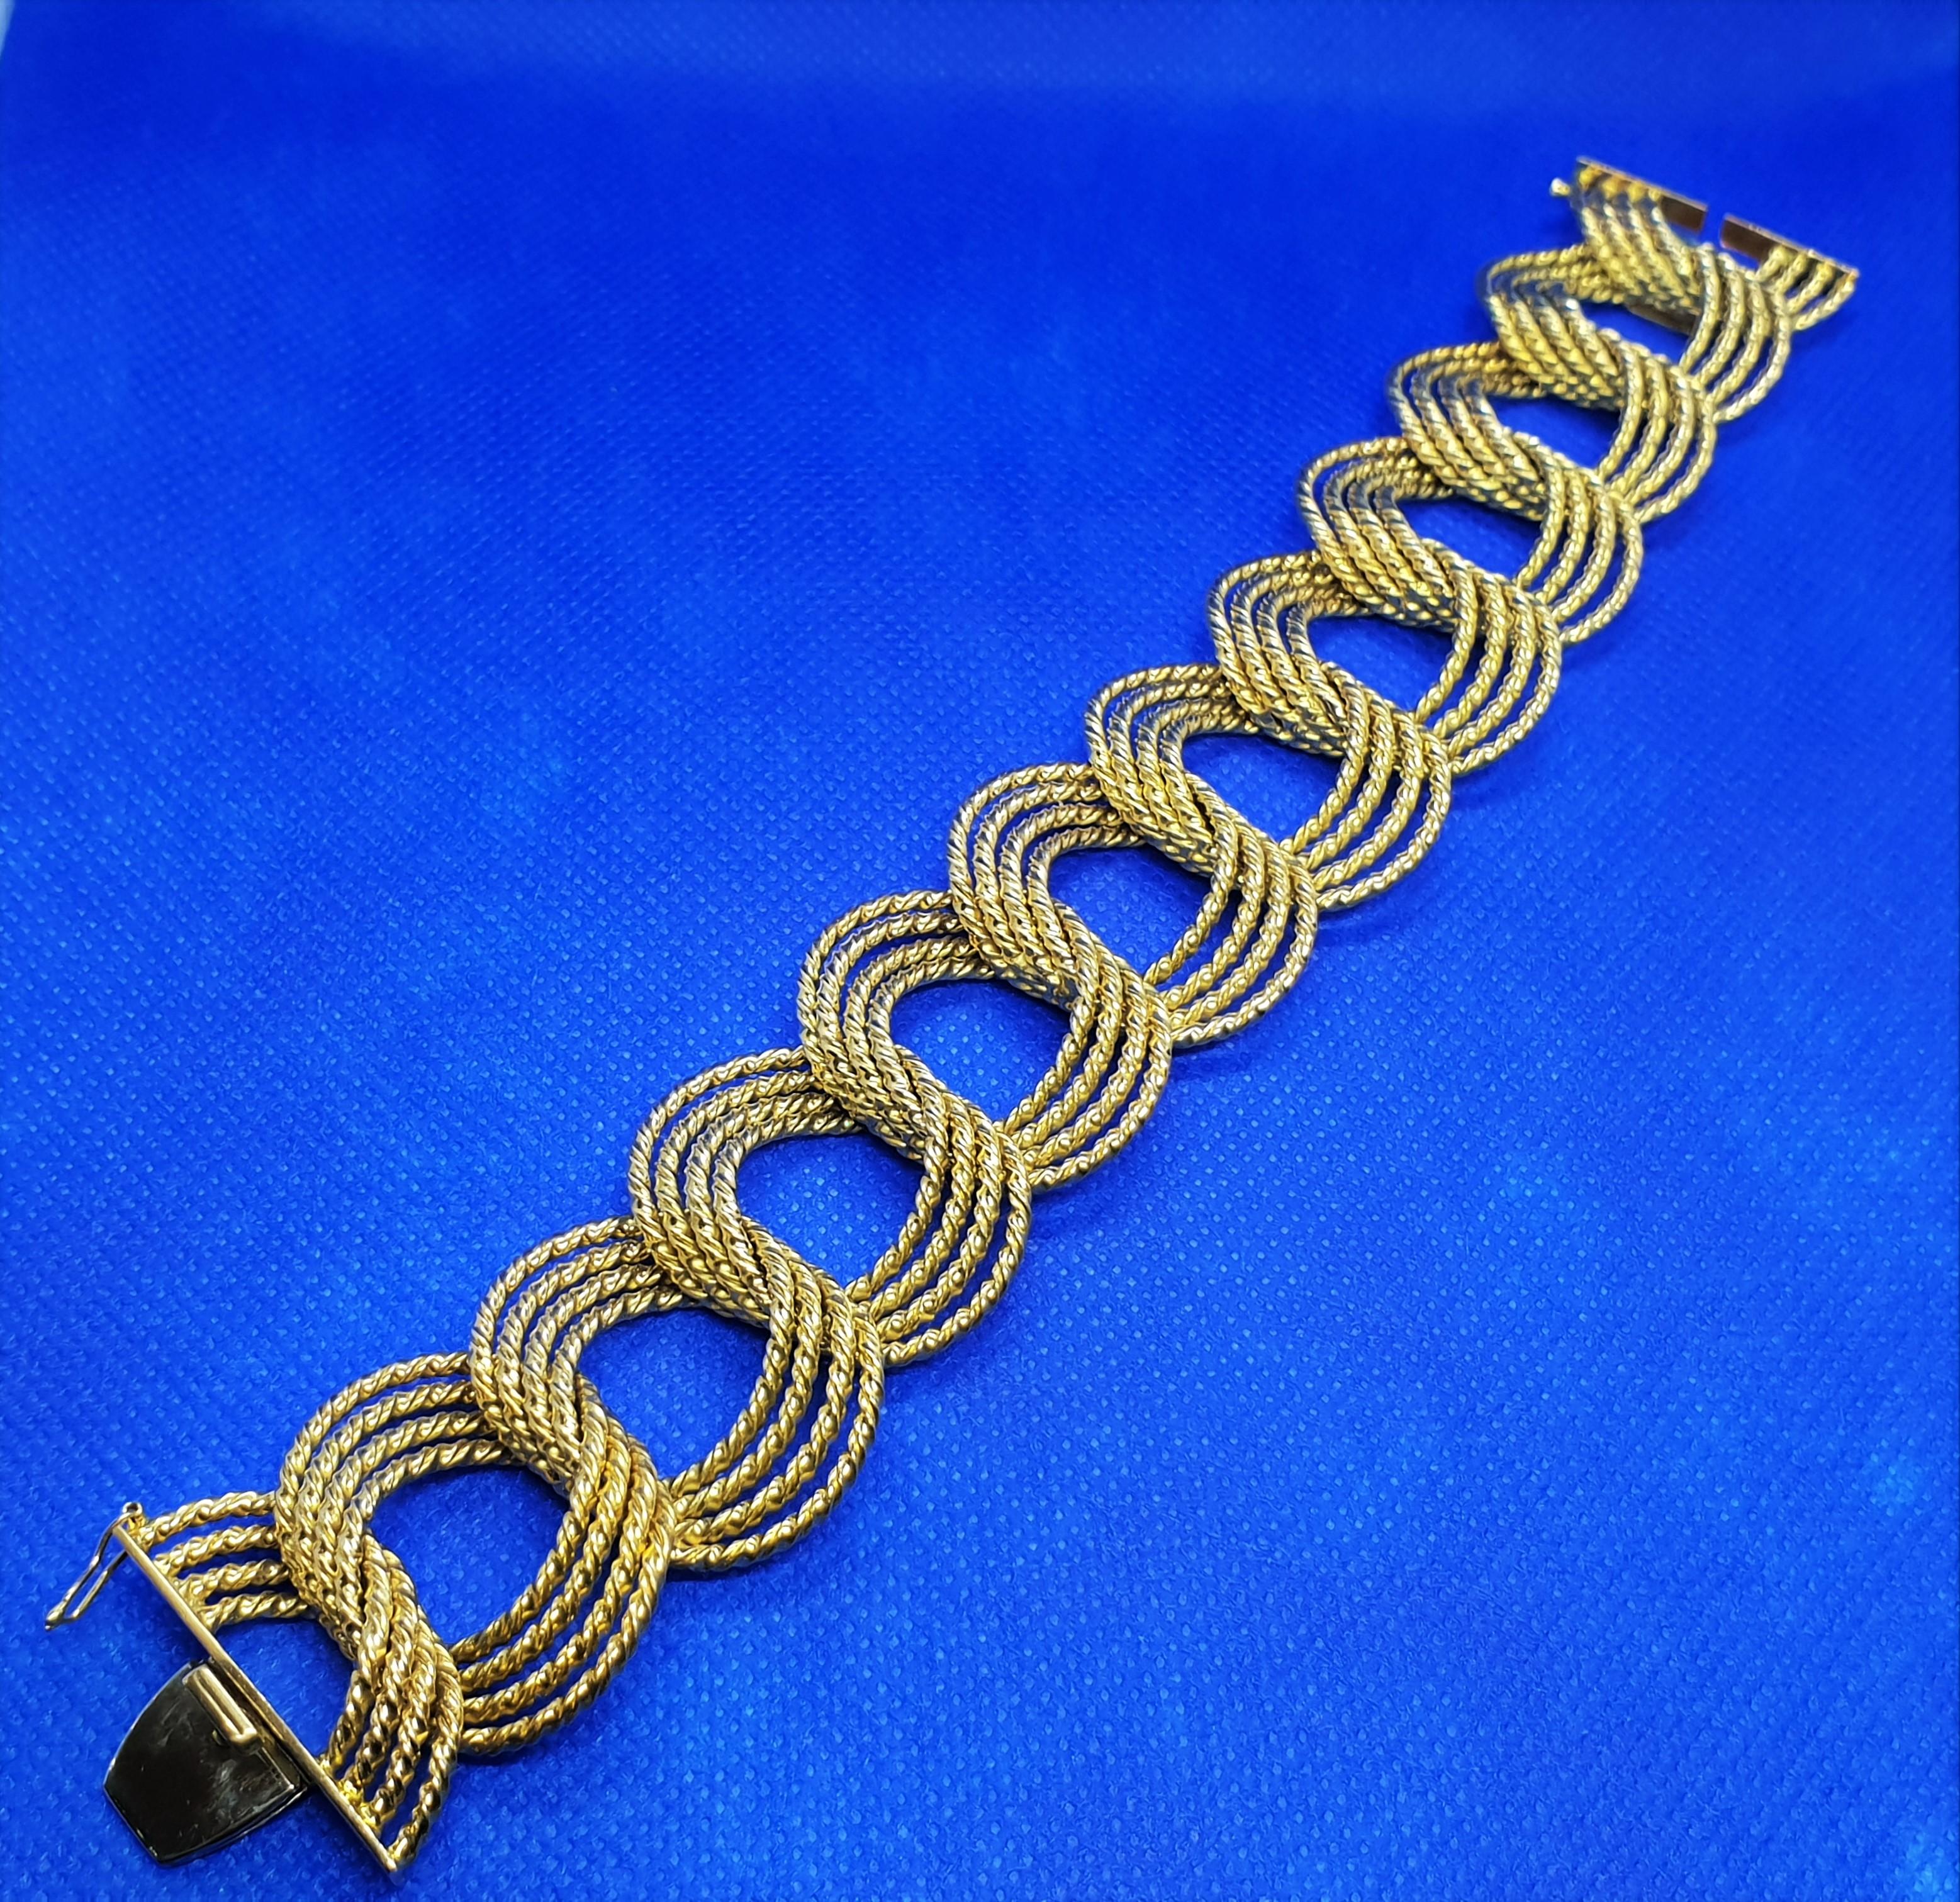 Massive 18k yellow gold chain bracelet, realized in Turin Italy around 1950s.

Length 22 cm, Width 3cm. 

Weight 115 gr. 

